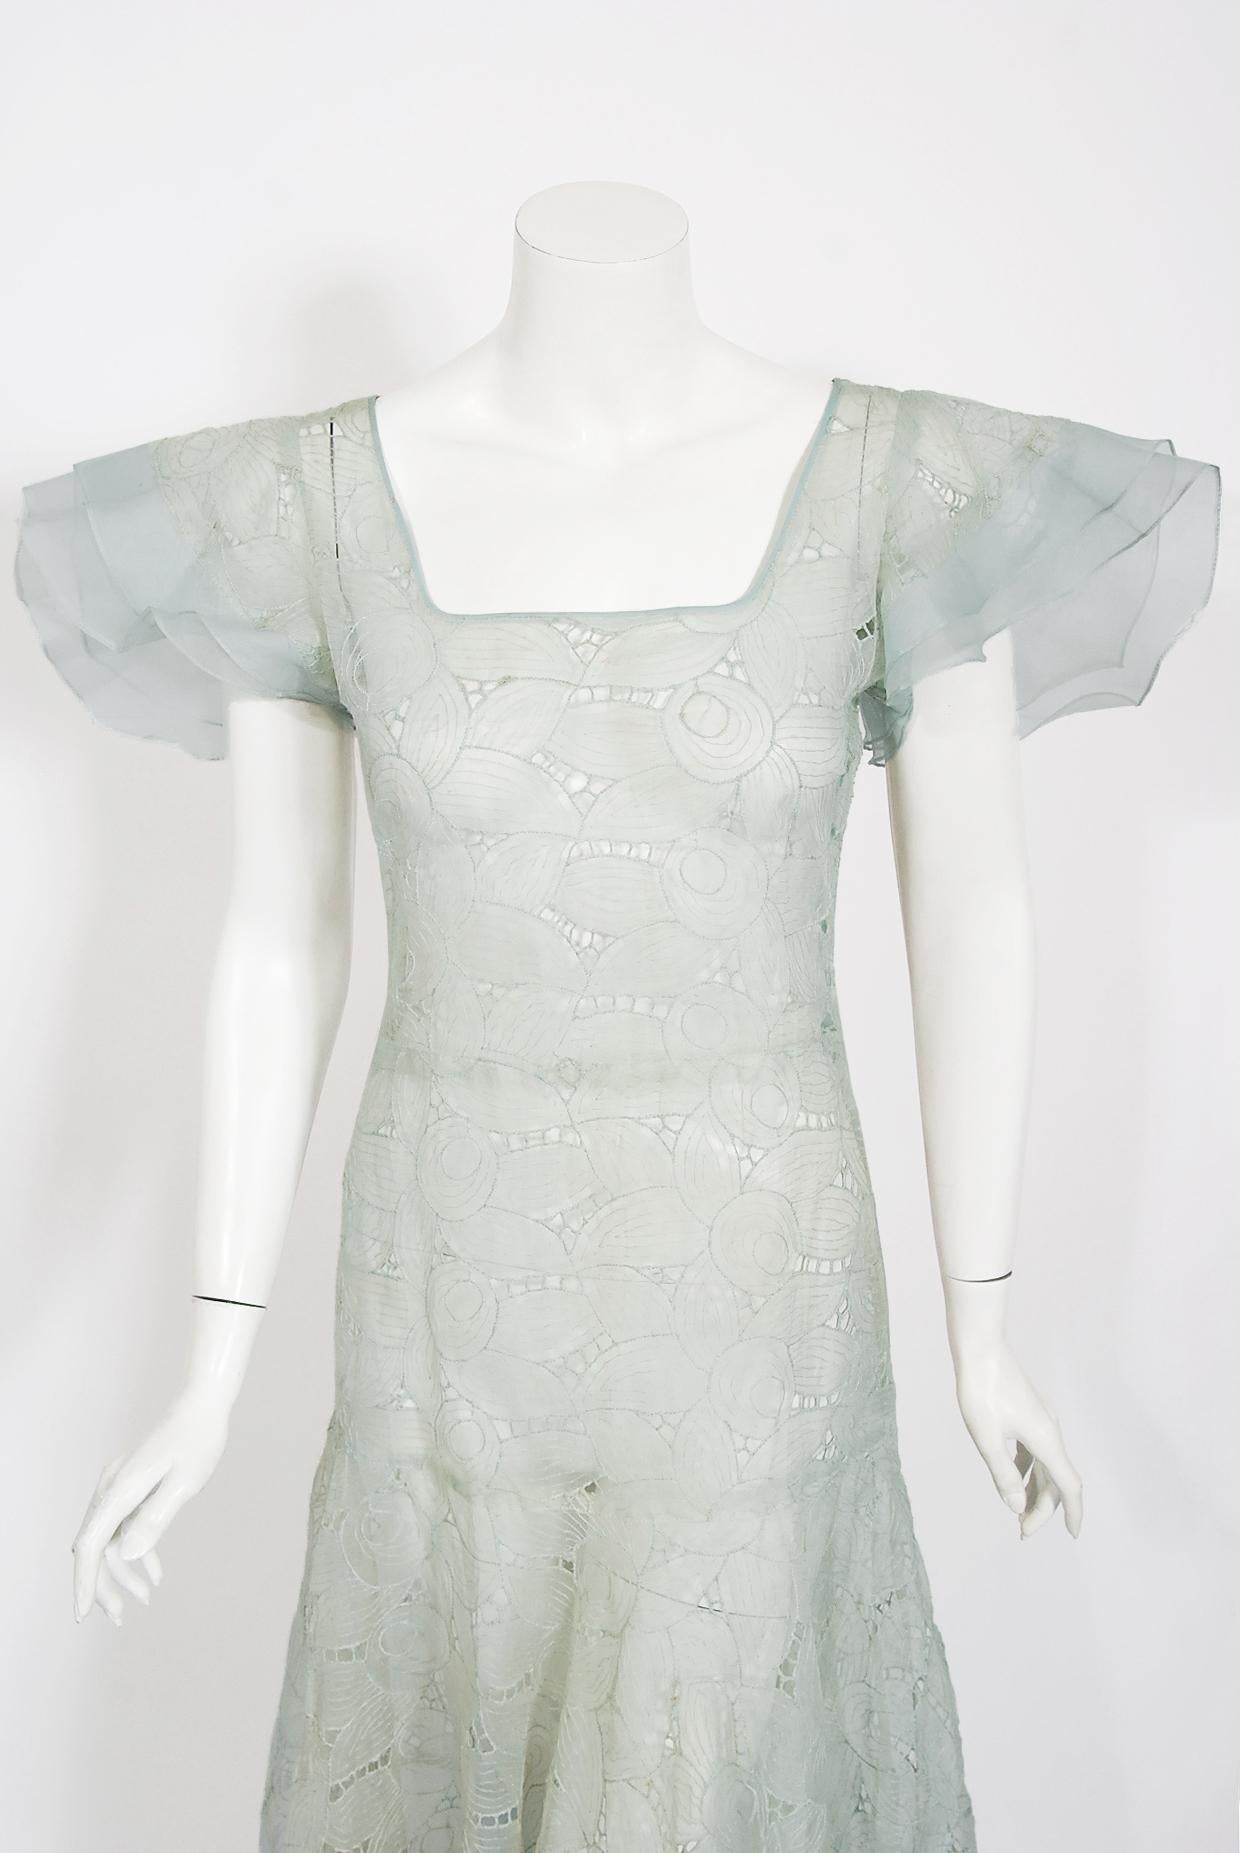 There are lots of lovely 1930's garments still around, but every once in a while I come across one that sets my heart a flutter! This is a simply beautiful 1930's light sky-blue sheer embroidered organza gown. The deco floral embroidery is really